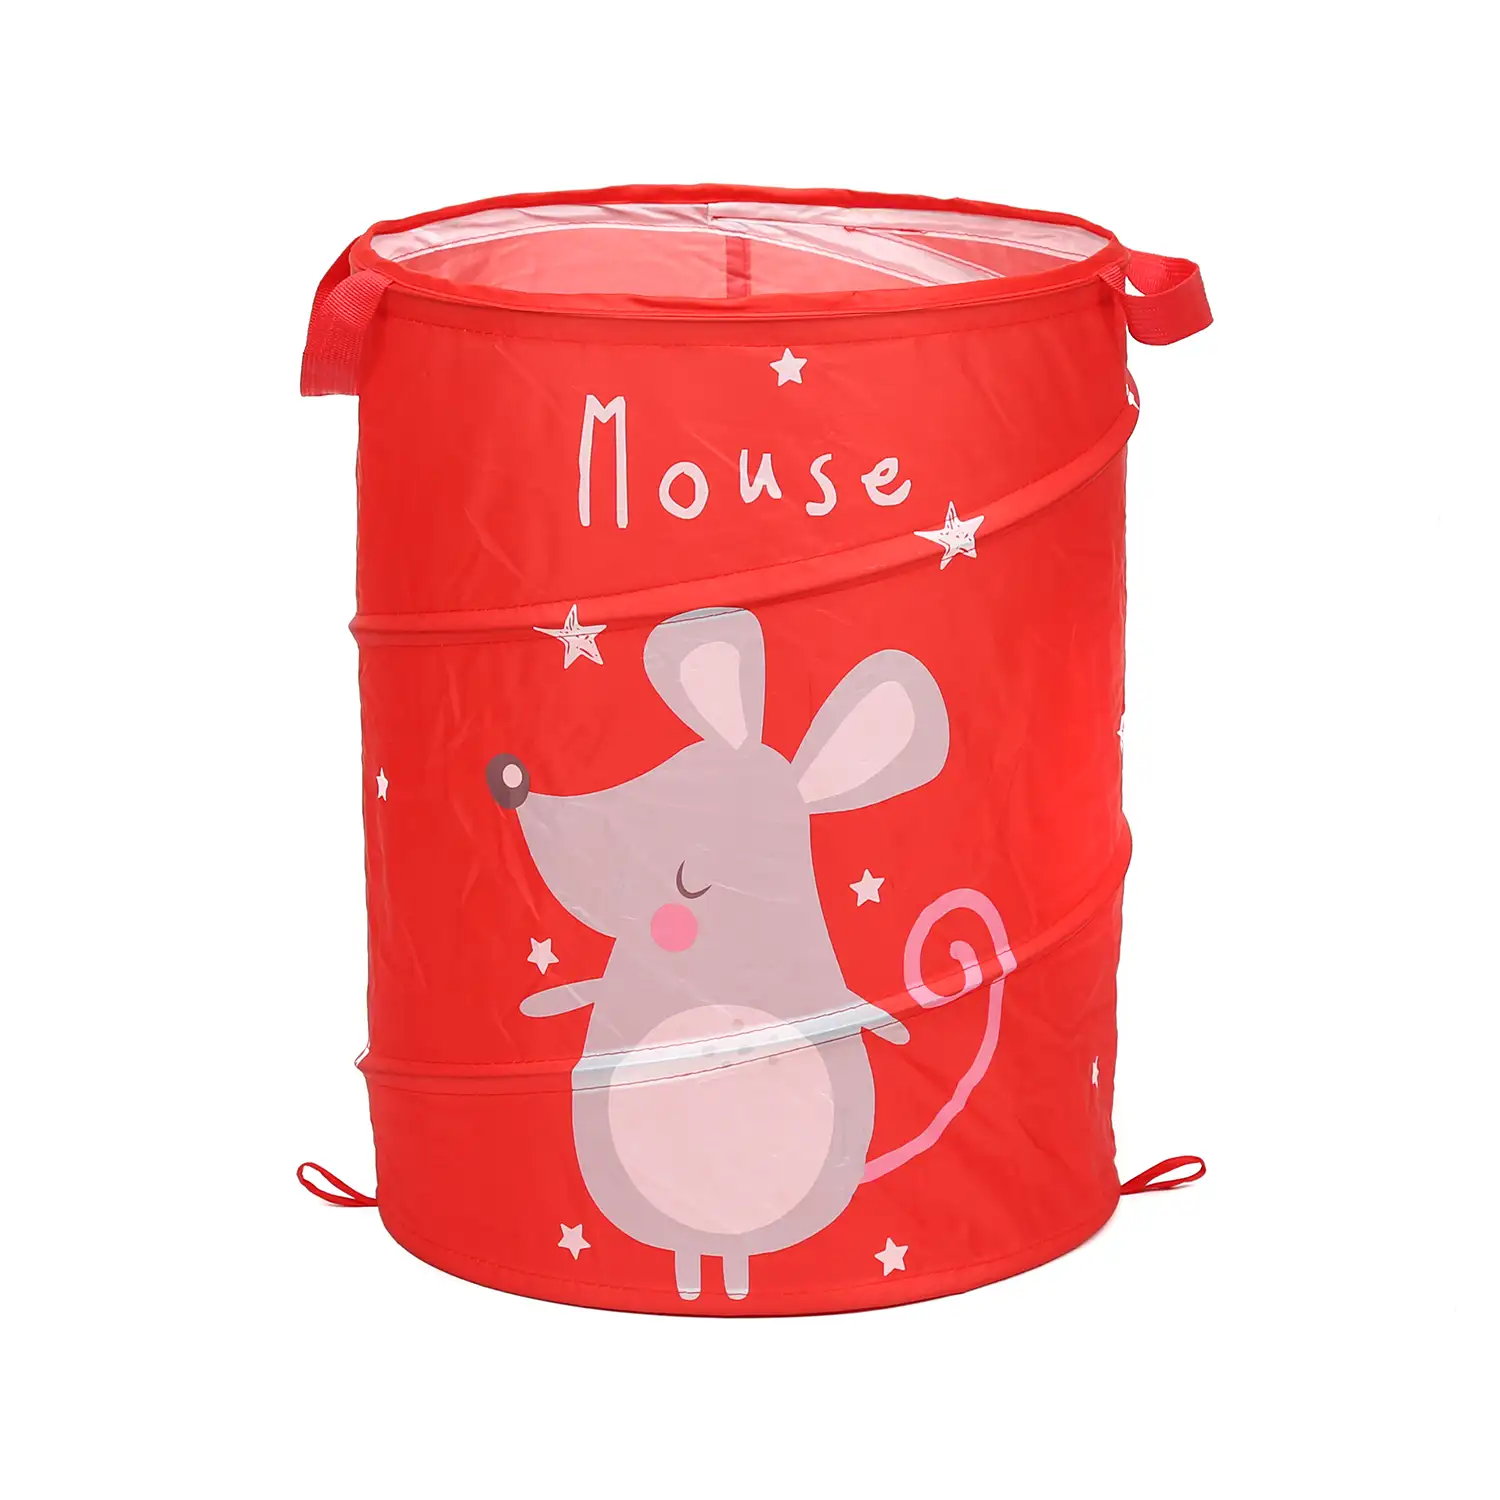 New arrival Portable Red Cartoon Collapsible Pop Up Folding Laundry Hamper Basket